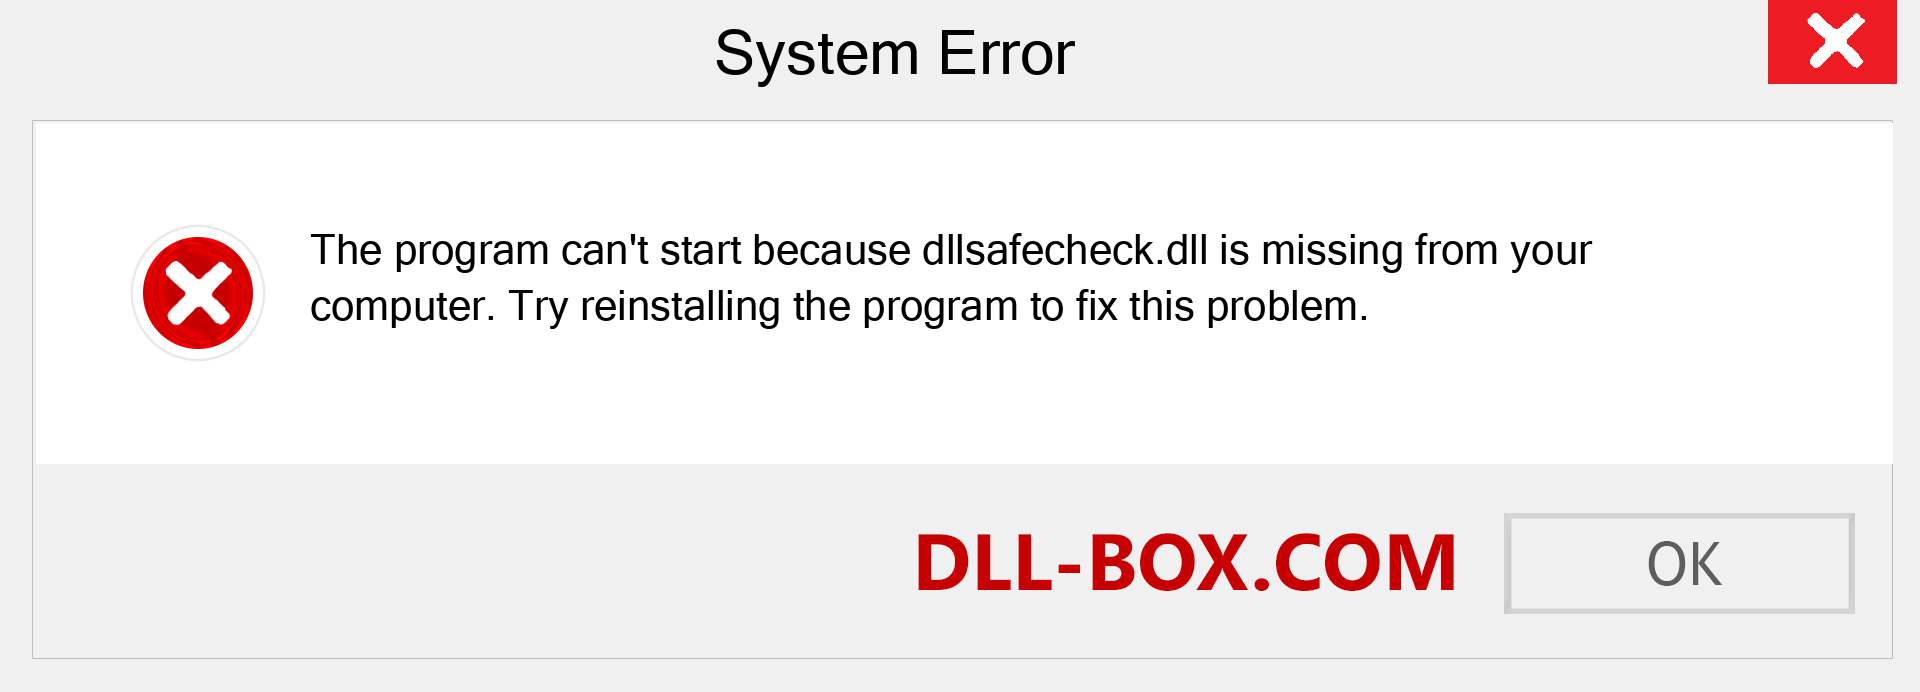  dllsafecheck.dll file is missing?. Download for Windows 7, 8, 10 - Fix  dllsafecheck dll Missing Error on Windows, photos, images